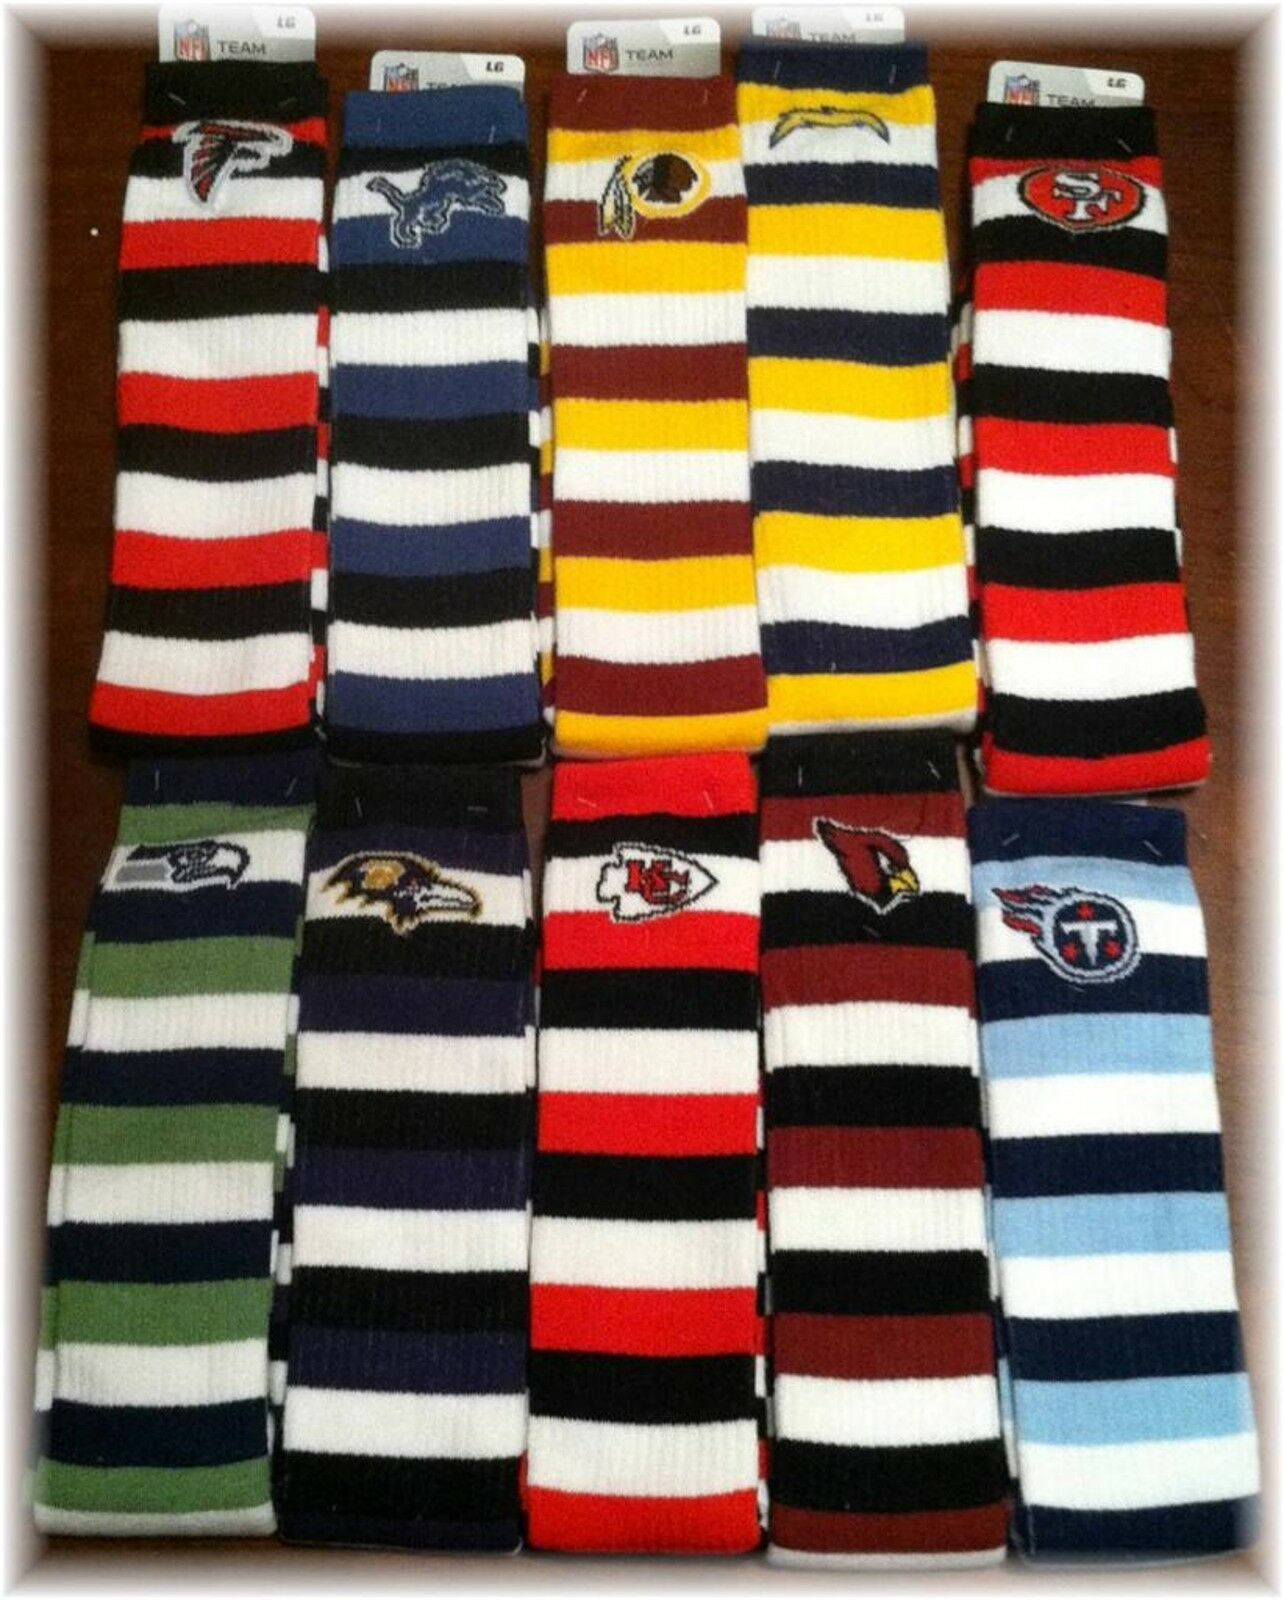 NFL Striped Knee High Hi Tube Socks One Size Fits Most Adults - Pick Your Team! - $9.95